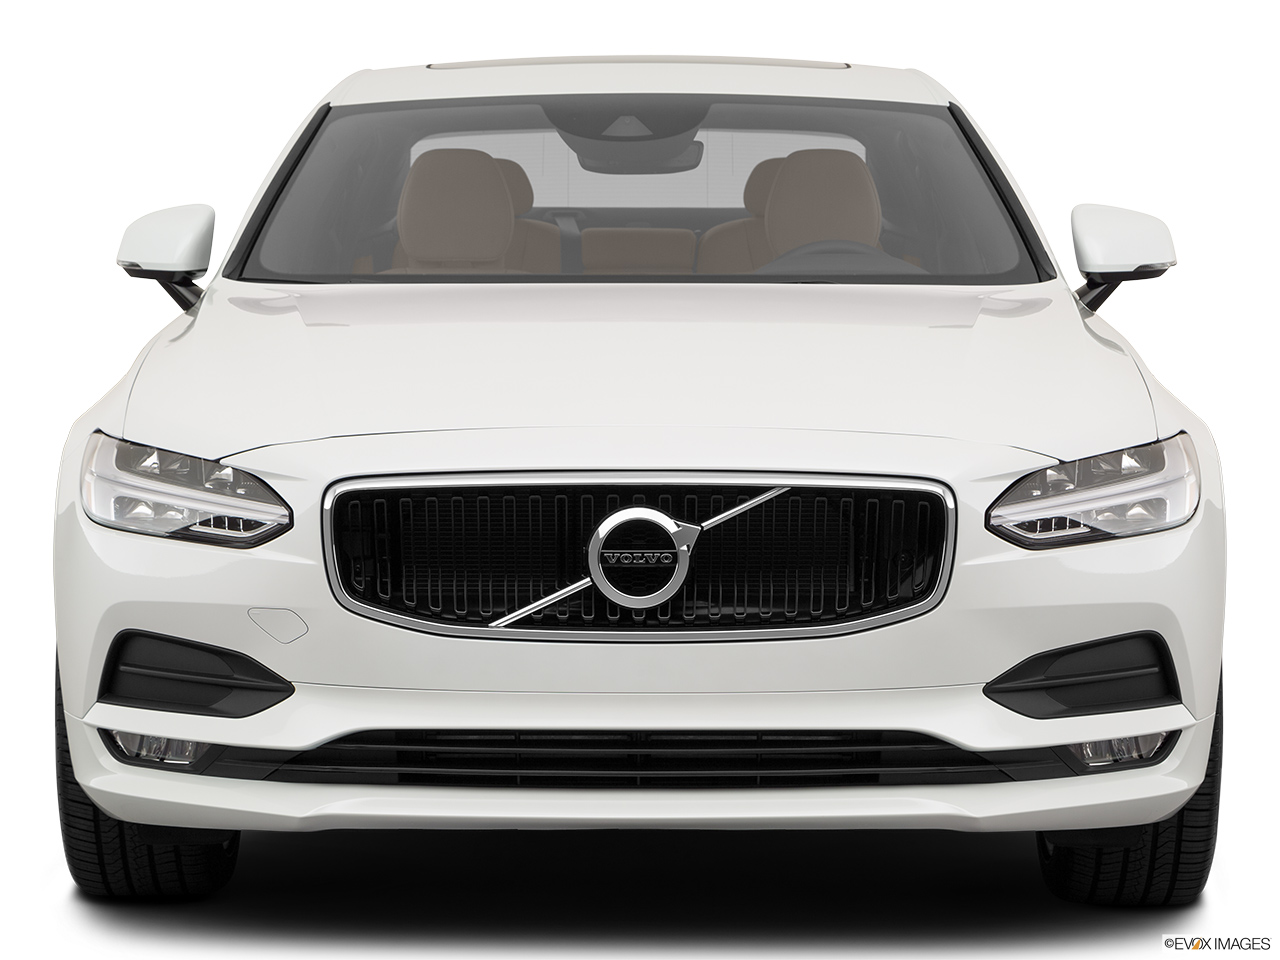 2019 Volvo S90 T5 Momentum Low/wide front. 